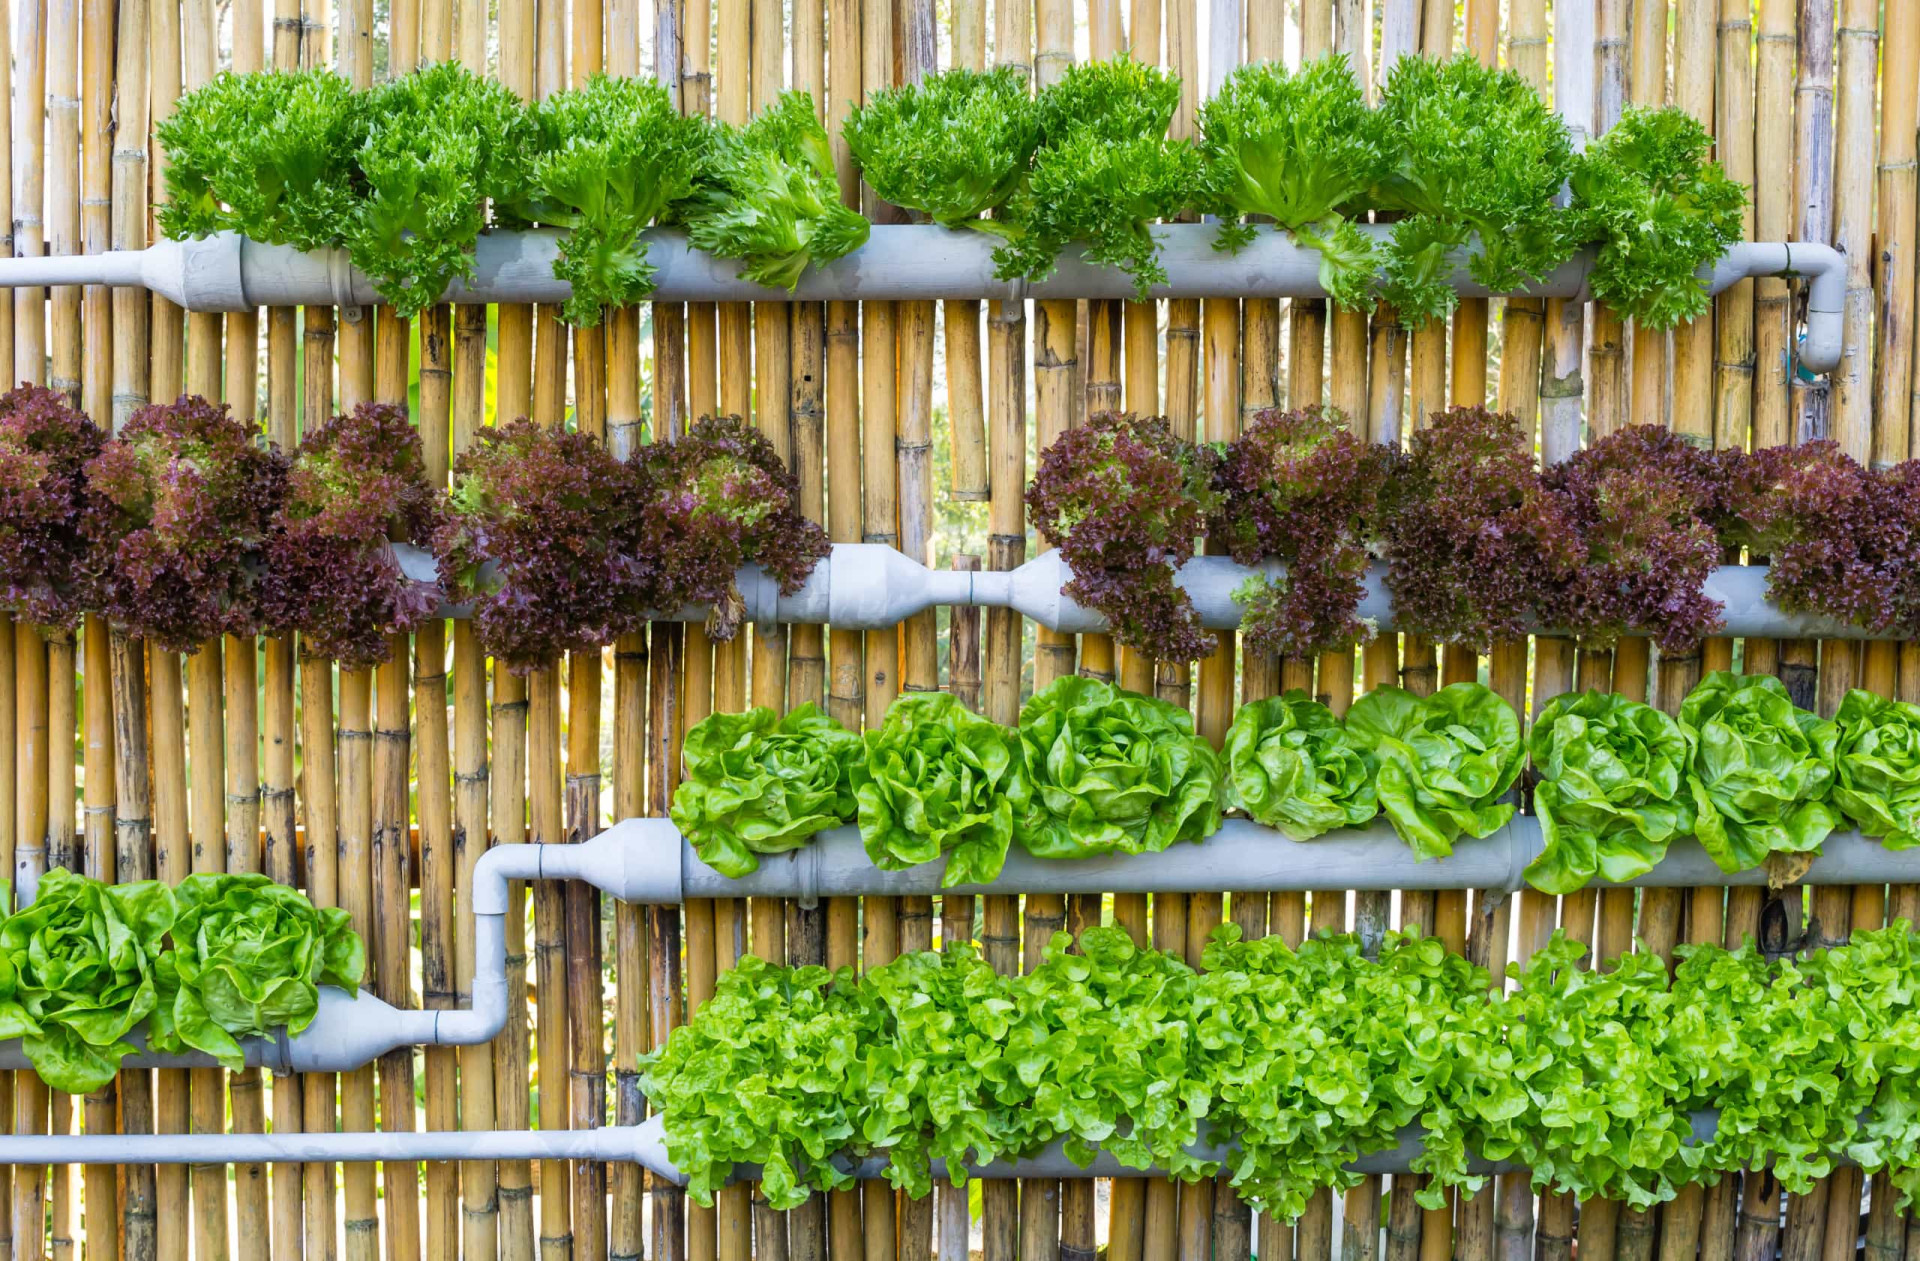 <p>Many people who start vegetable gardens don’t make the most of their available space. To do so, consider vertical gardening techniques. This can dramatically increase the number of crops that you'll be able to grow in the space available to you.</p><p><a href="https://www.msn.com/en-us/community/channel/vid-7xx8mnucu55yw63we9va2gwr7uihbxwc68fxqp25x6tg4ftibpra?cvid=94631541bc0f4f89bfd59158d696ad7e">Follow us and access great exclusive content every day</a></p>